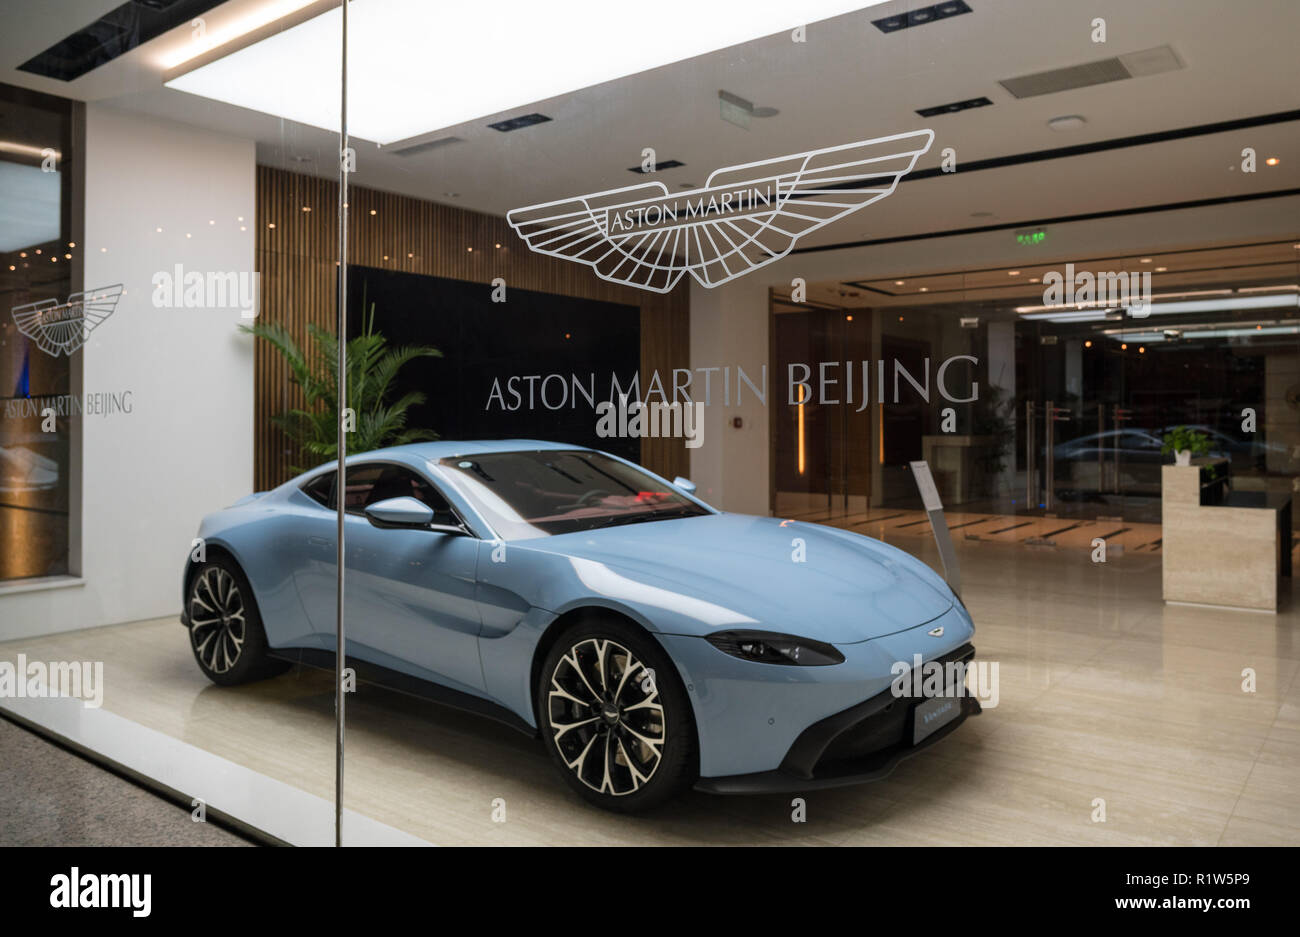 Aston Martin showroom in Beijing China with new Vantage car on display Stock Photo